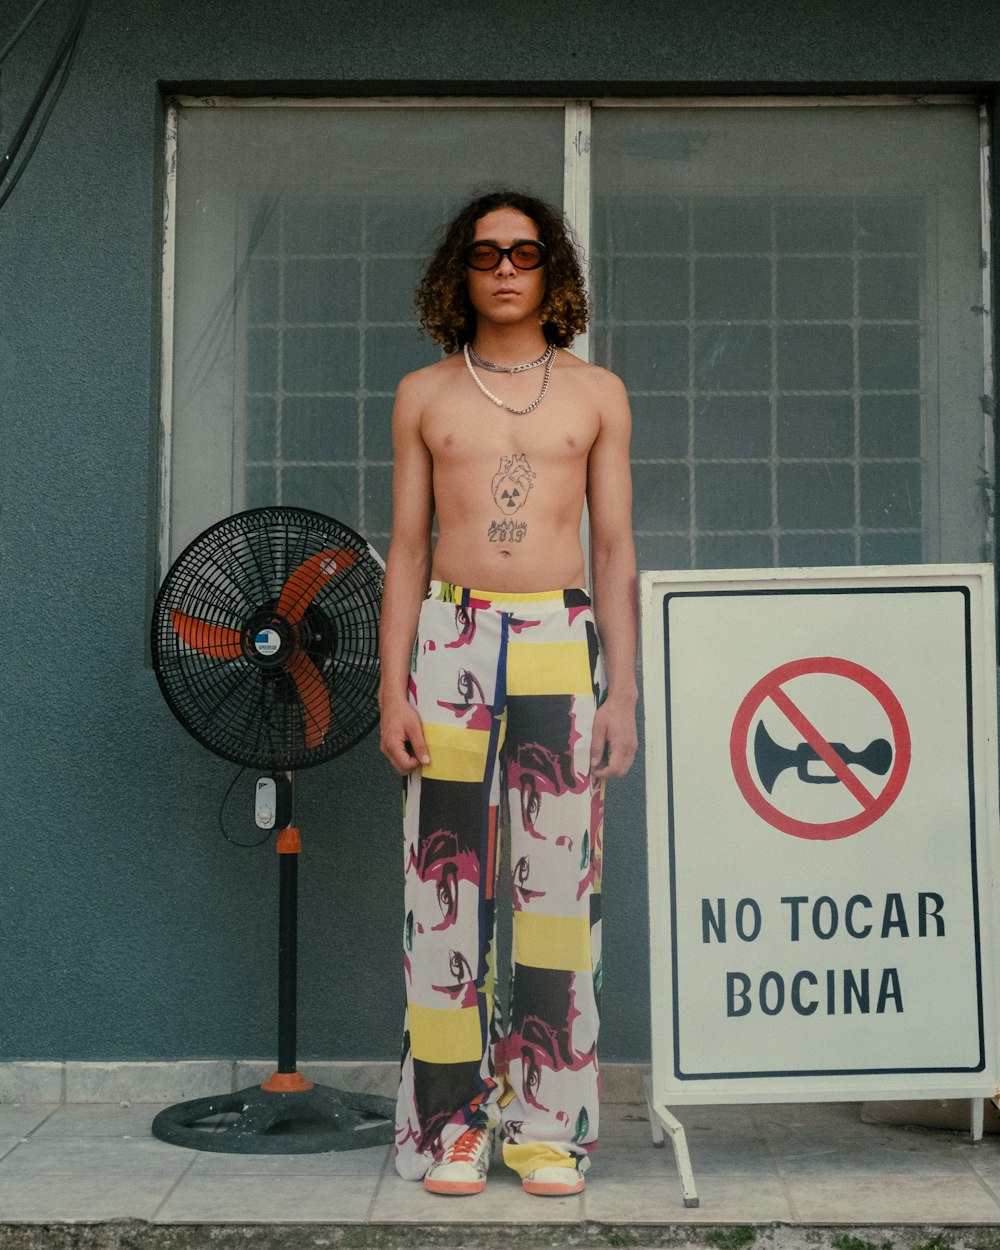 a man standing in front of a no tocar sign